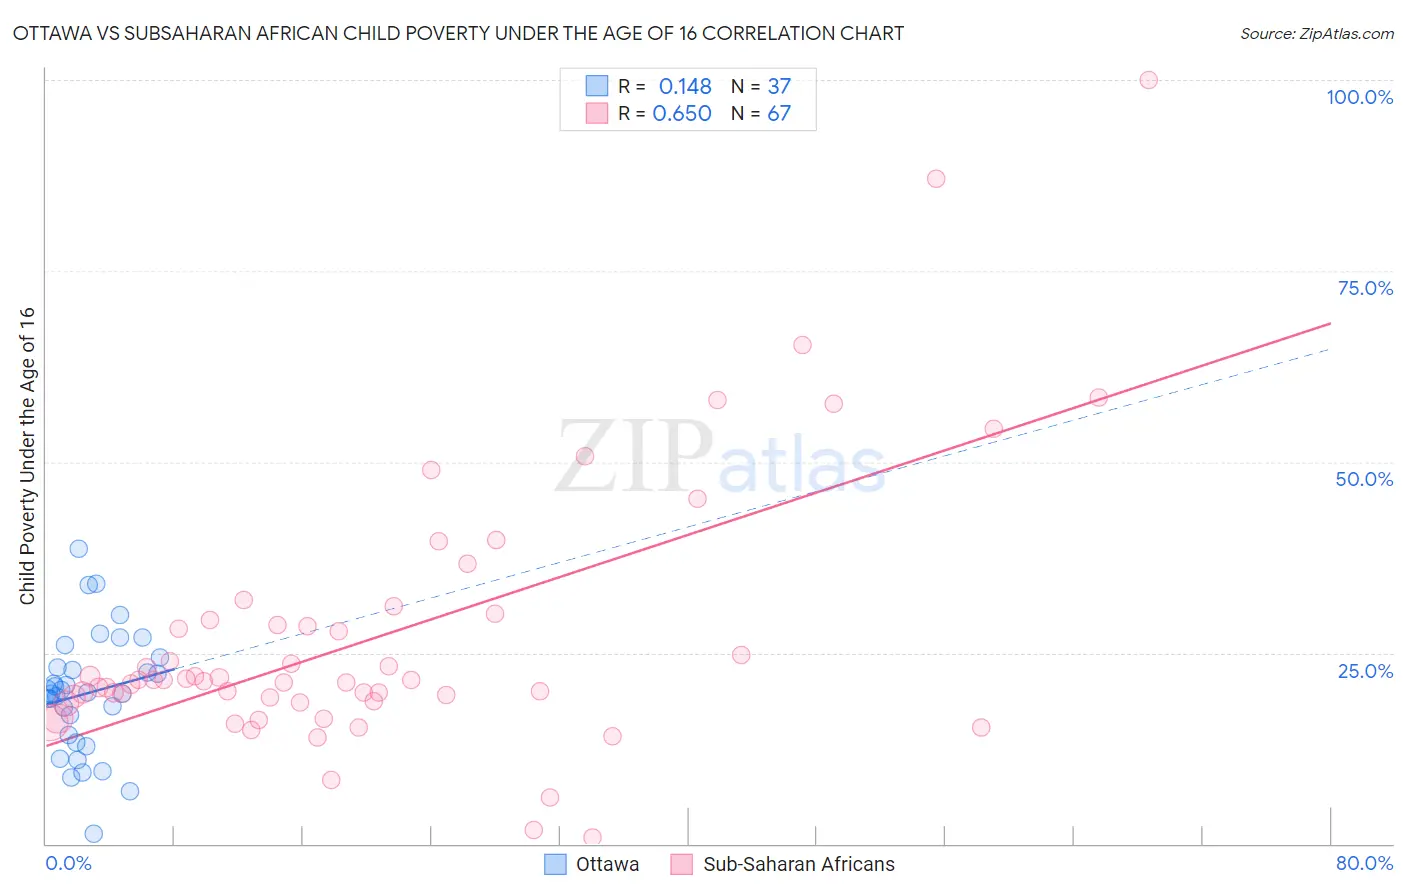 Ottawa vs Subsaharan African Child Poverty Under the Age of 16